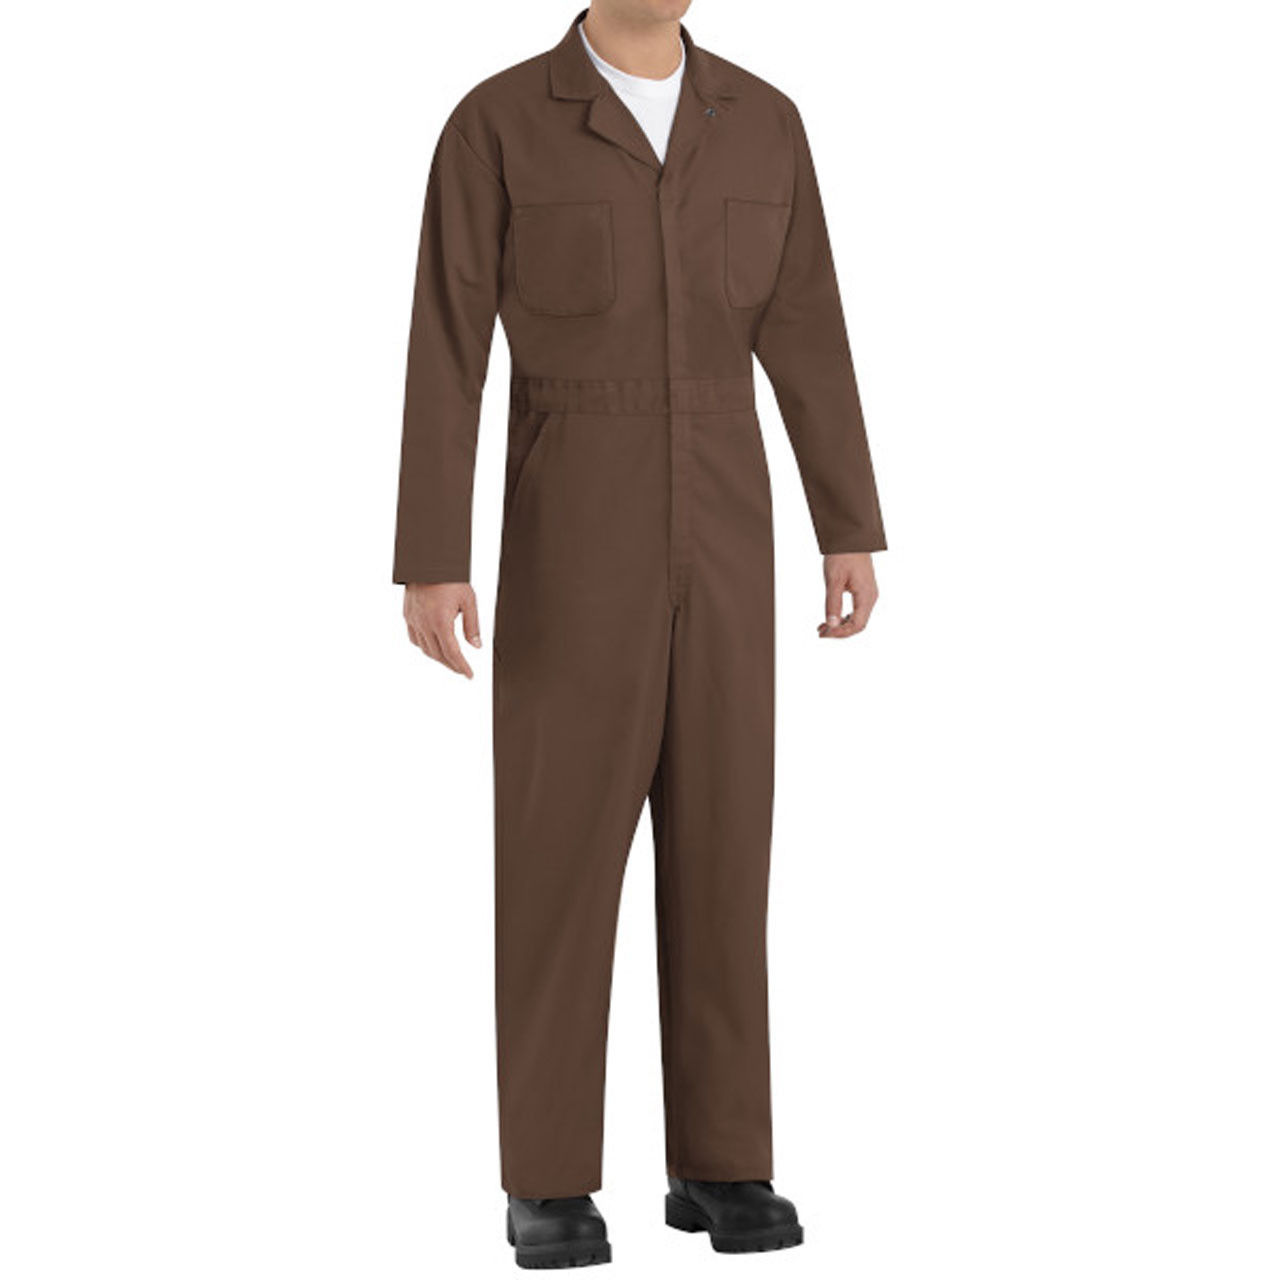 Is the material of the brown coveralls twill?